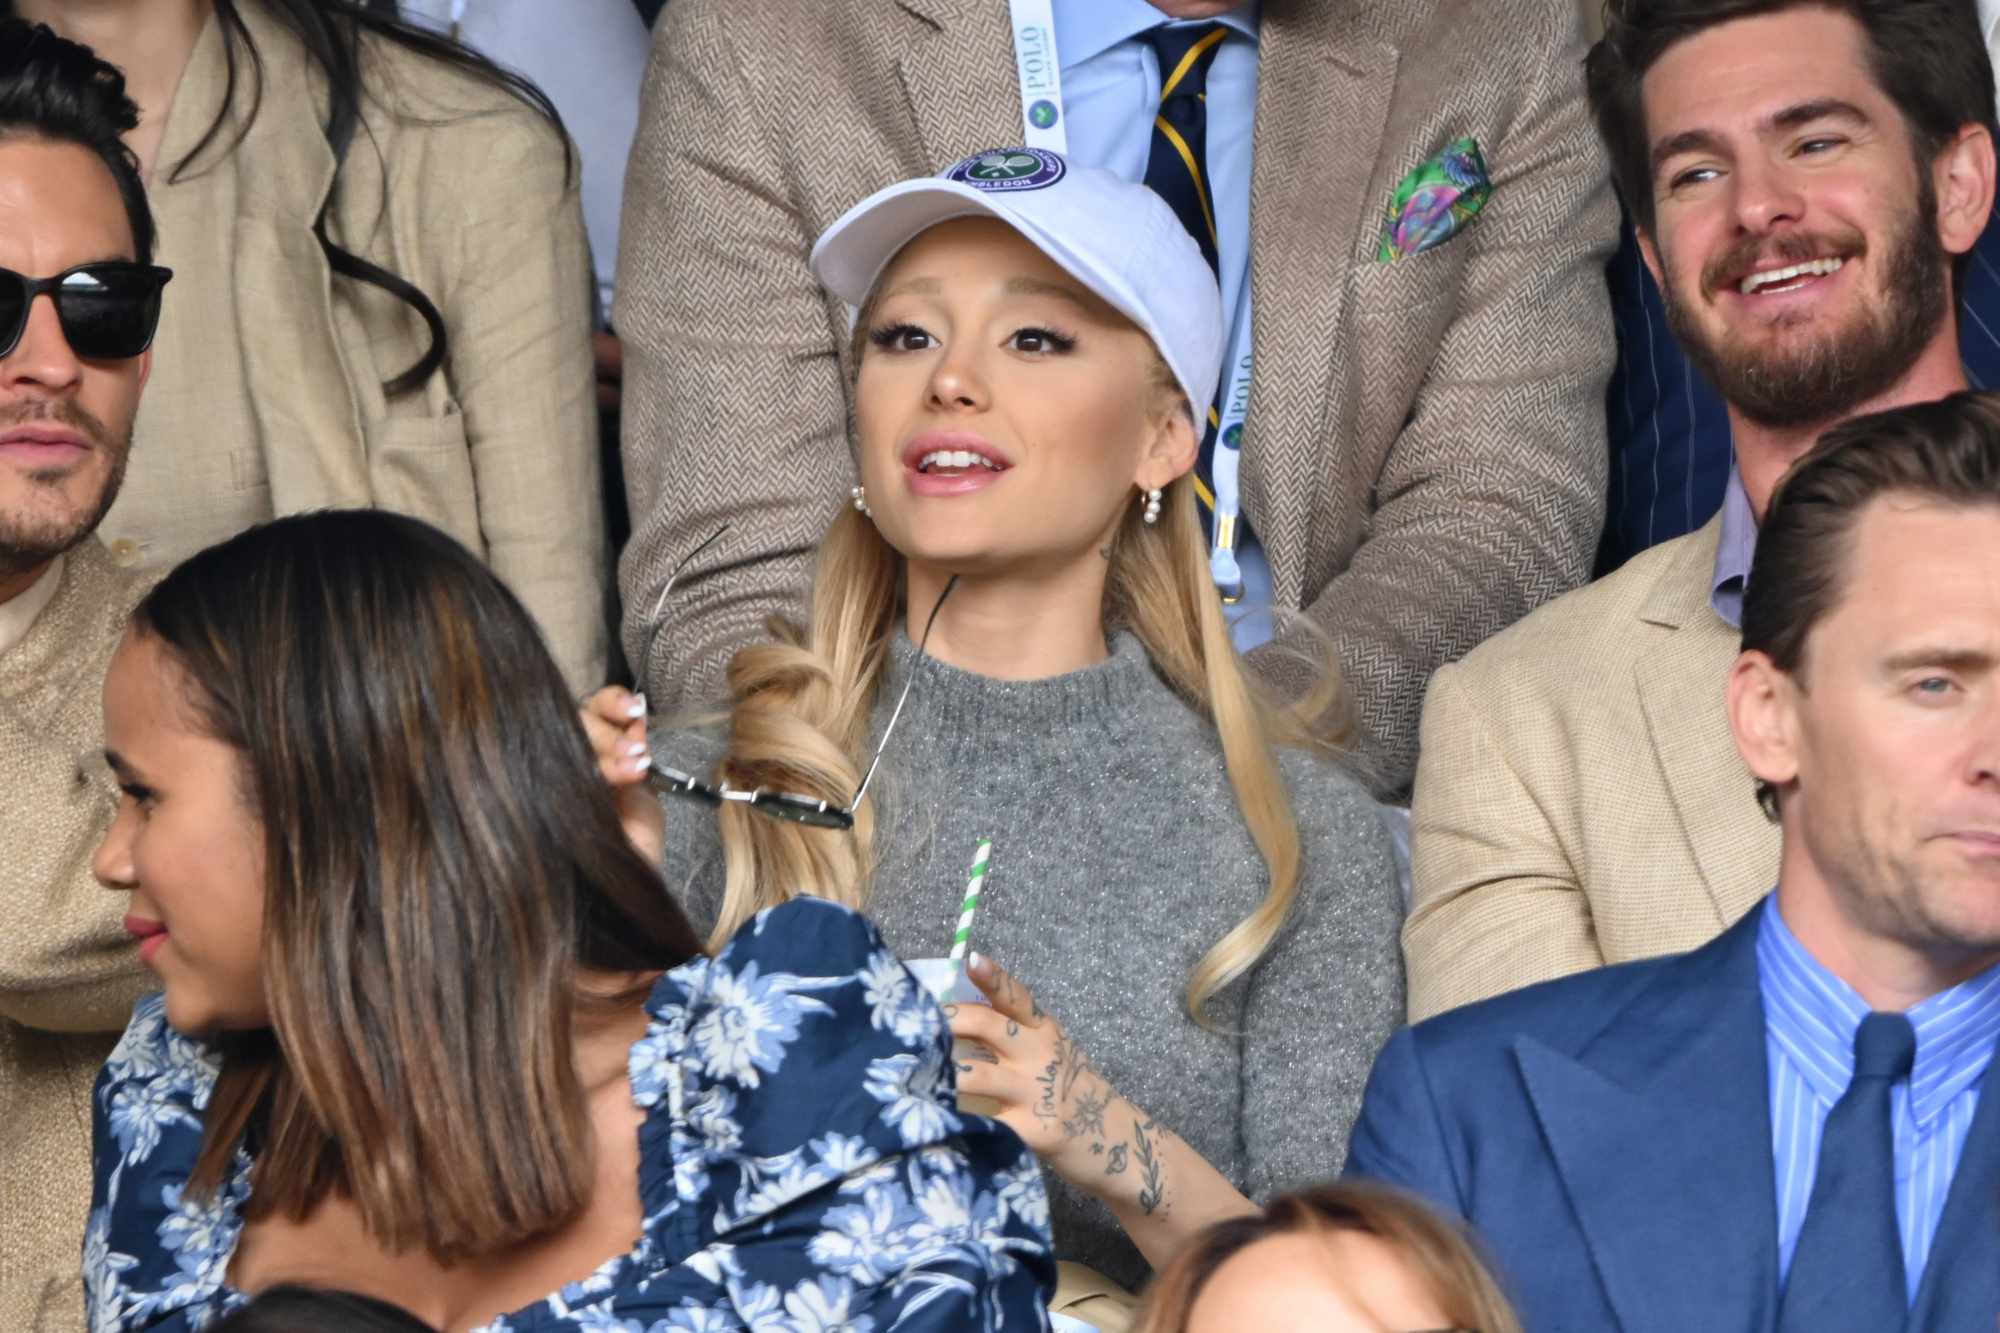 Ariana Grande wears a white cap over blonde hair and grey sweater at the US Open